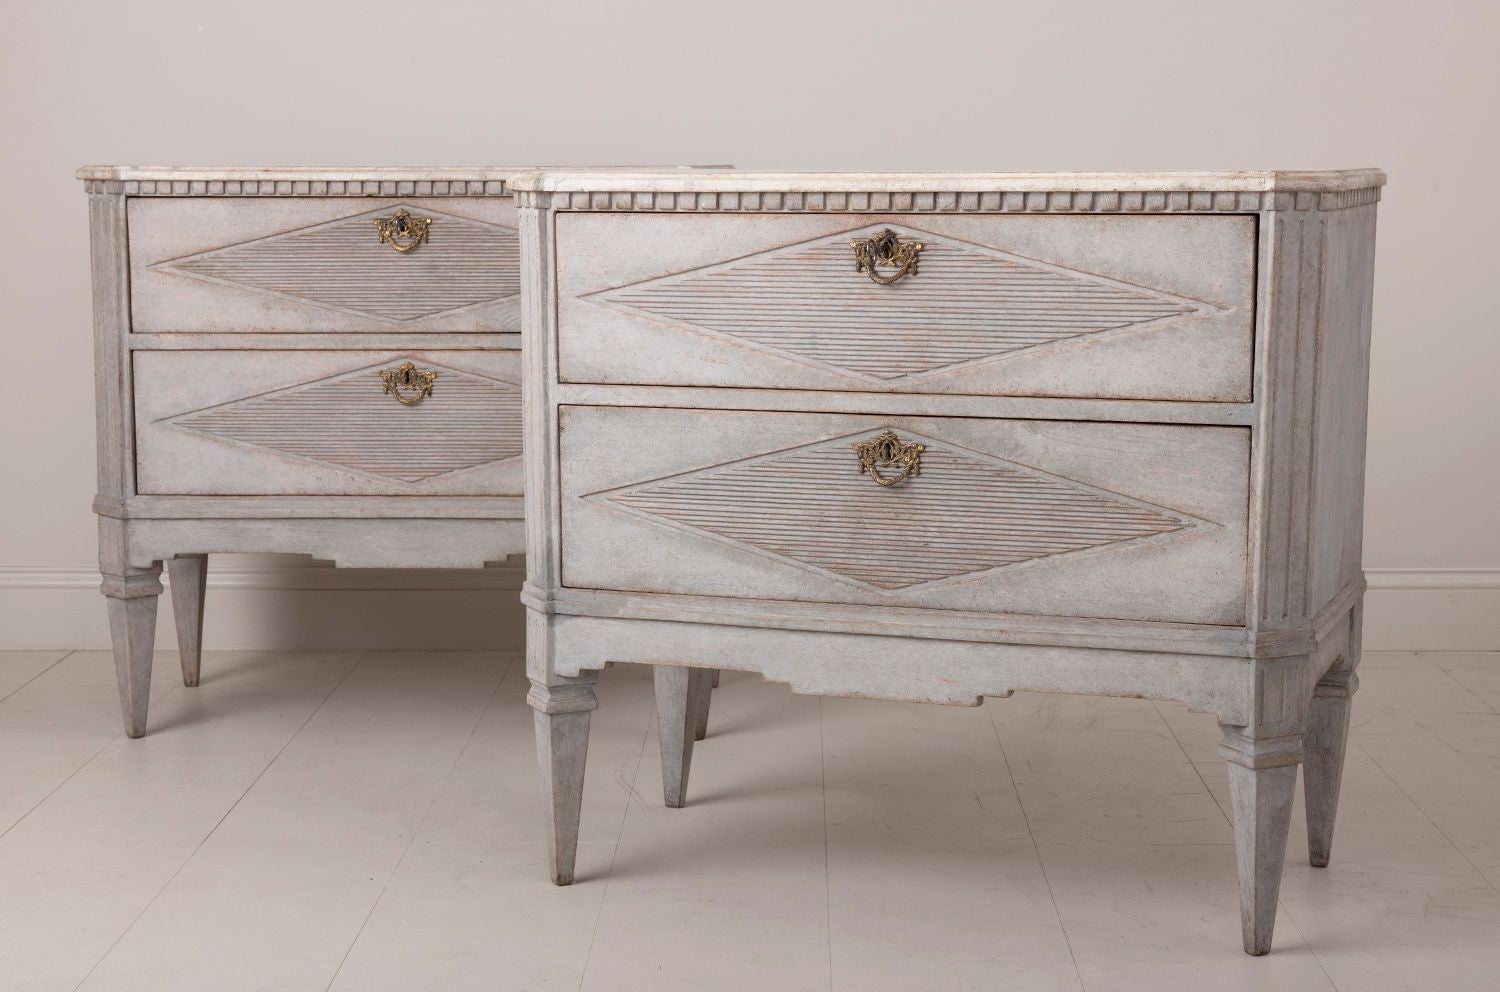 A pair of Swedish commodes in the Gustavian style with hand-painted marbleized tops. These chests have beautifully reeded drawer fronts with a lozenge design. Two large drawers, brass hardware, dentil molding around the top, canted and fluted corner